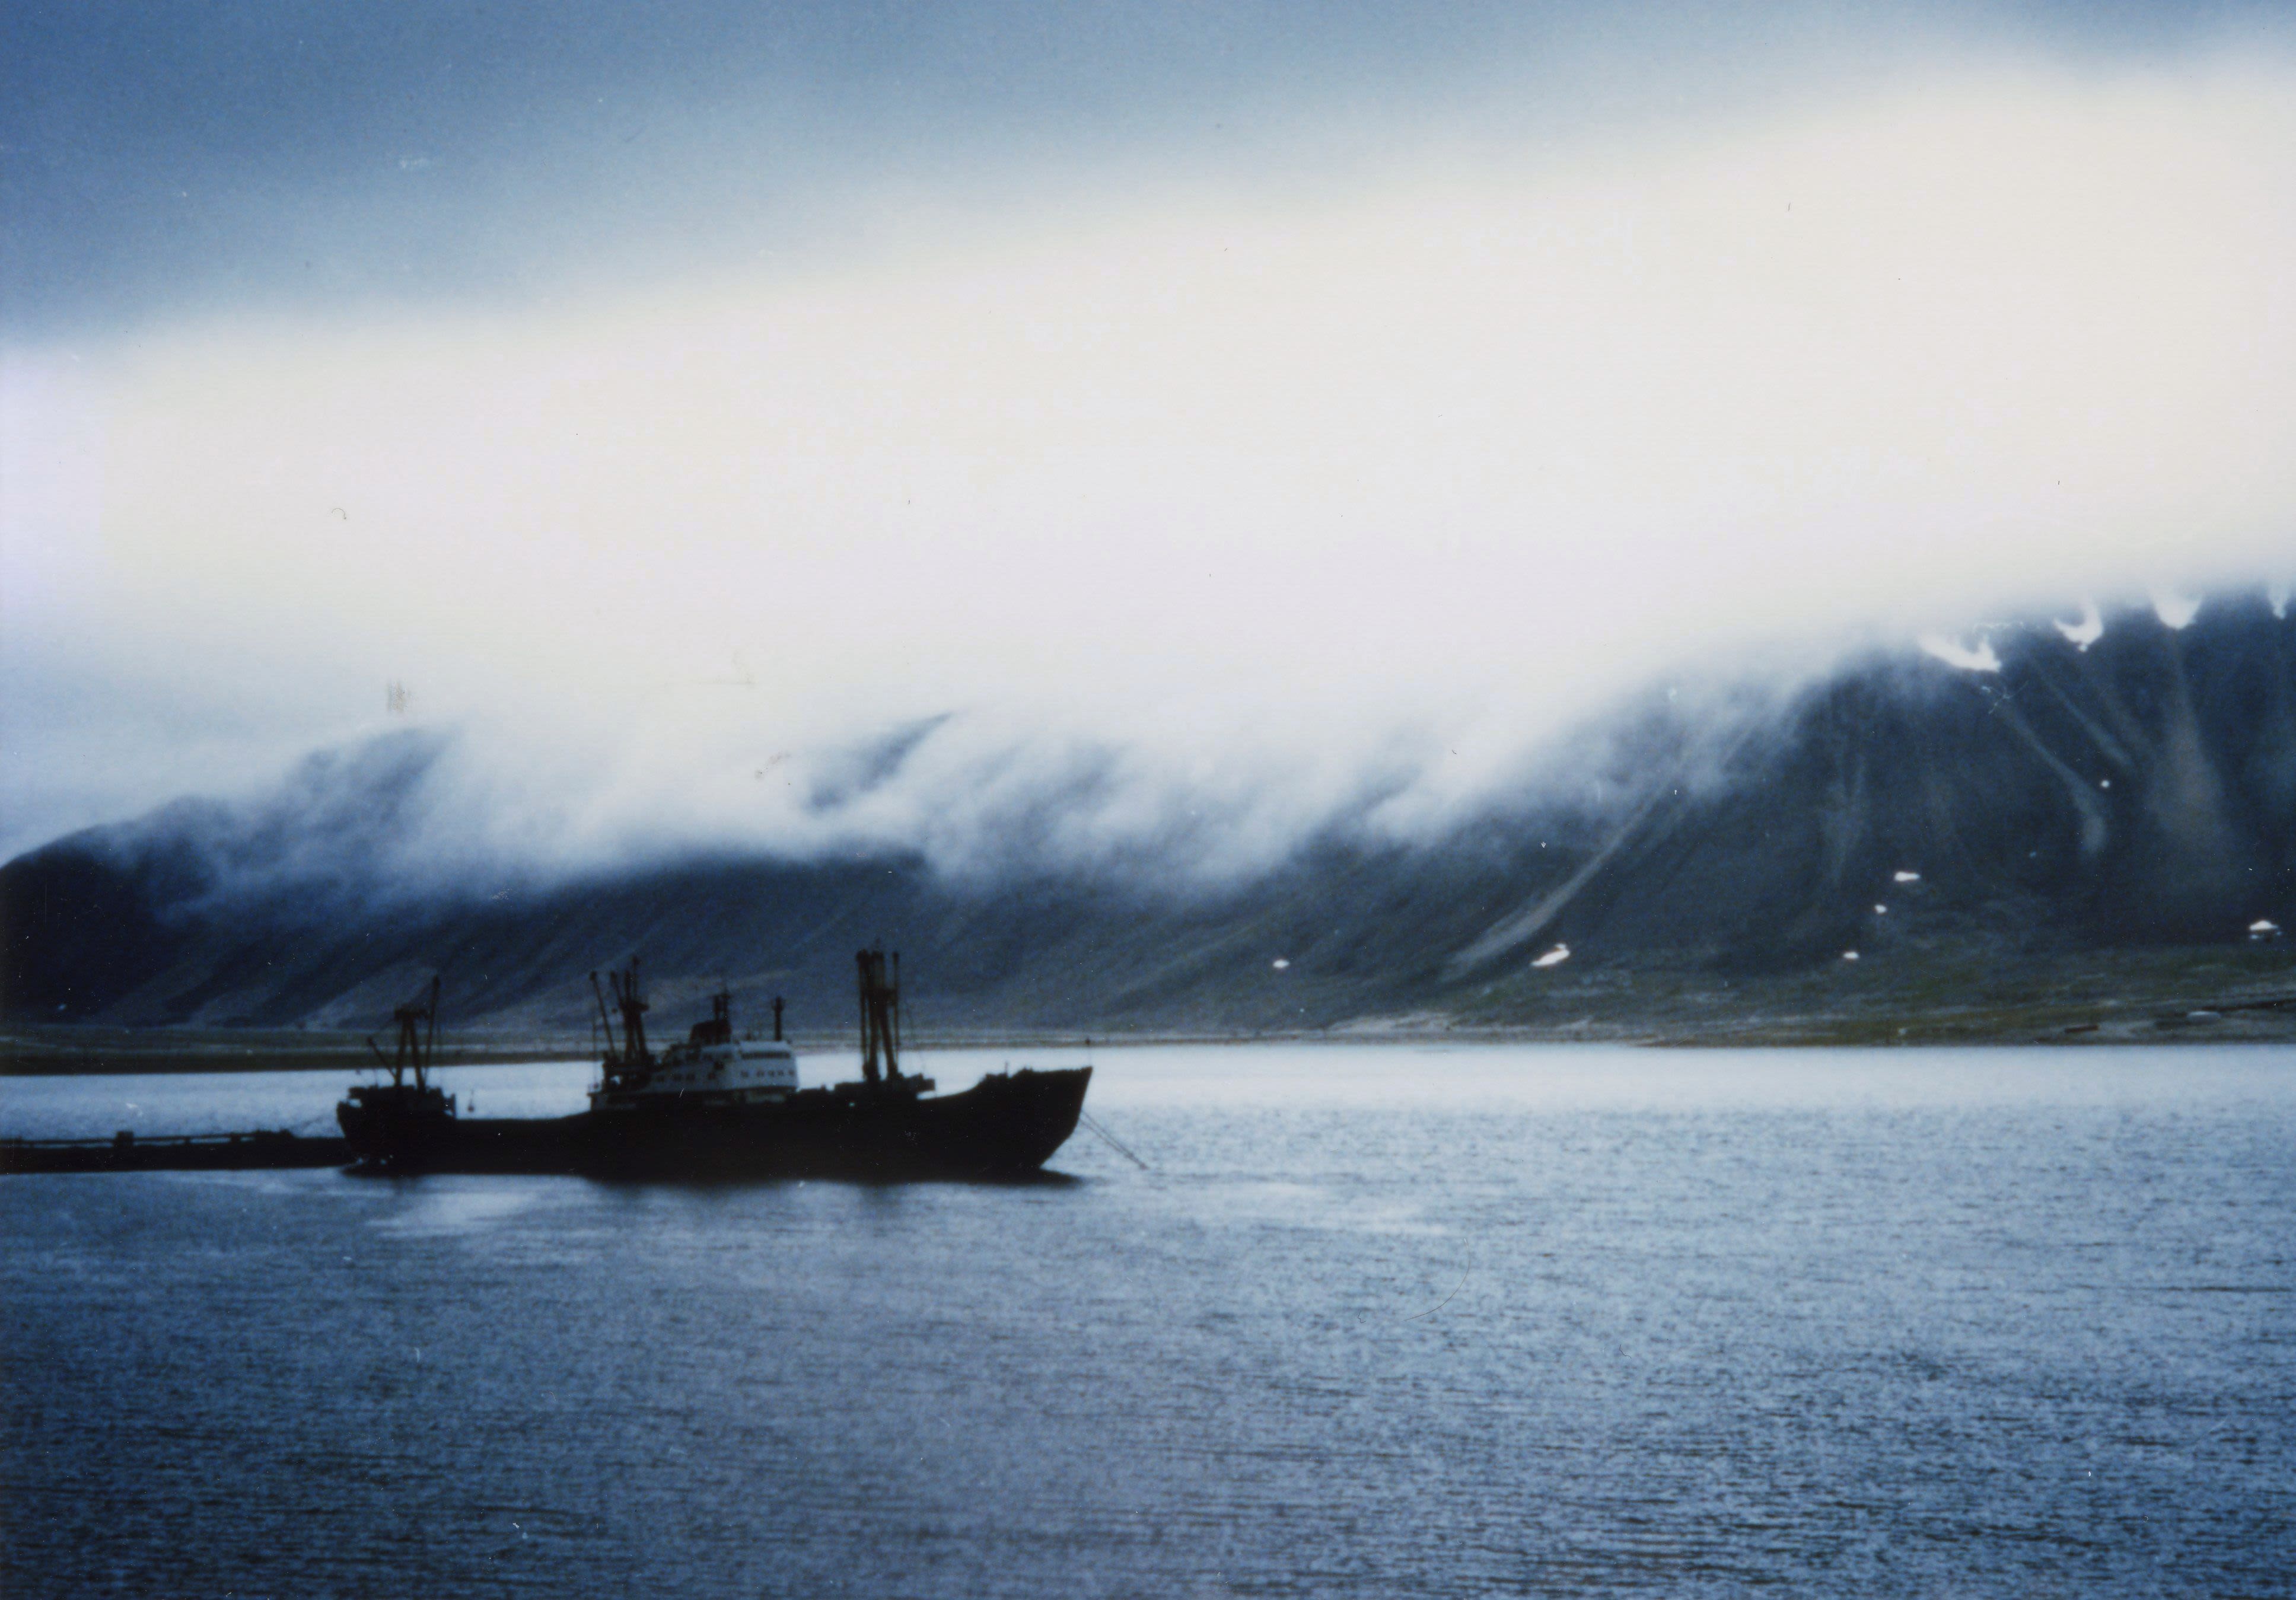 A ship sails past a foggy mountain in Chukotka. Credit: ICC Canada